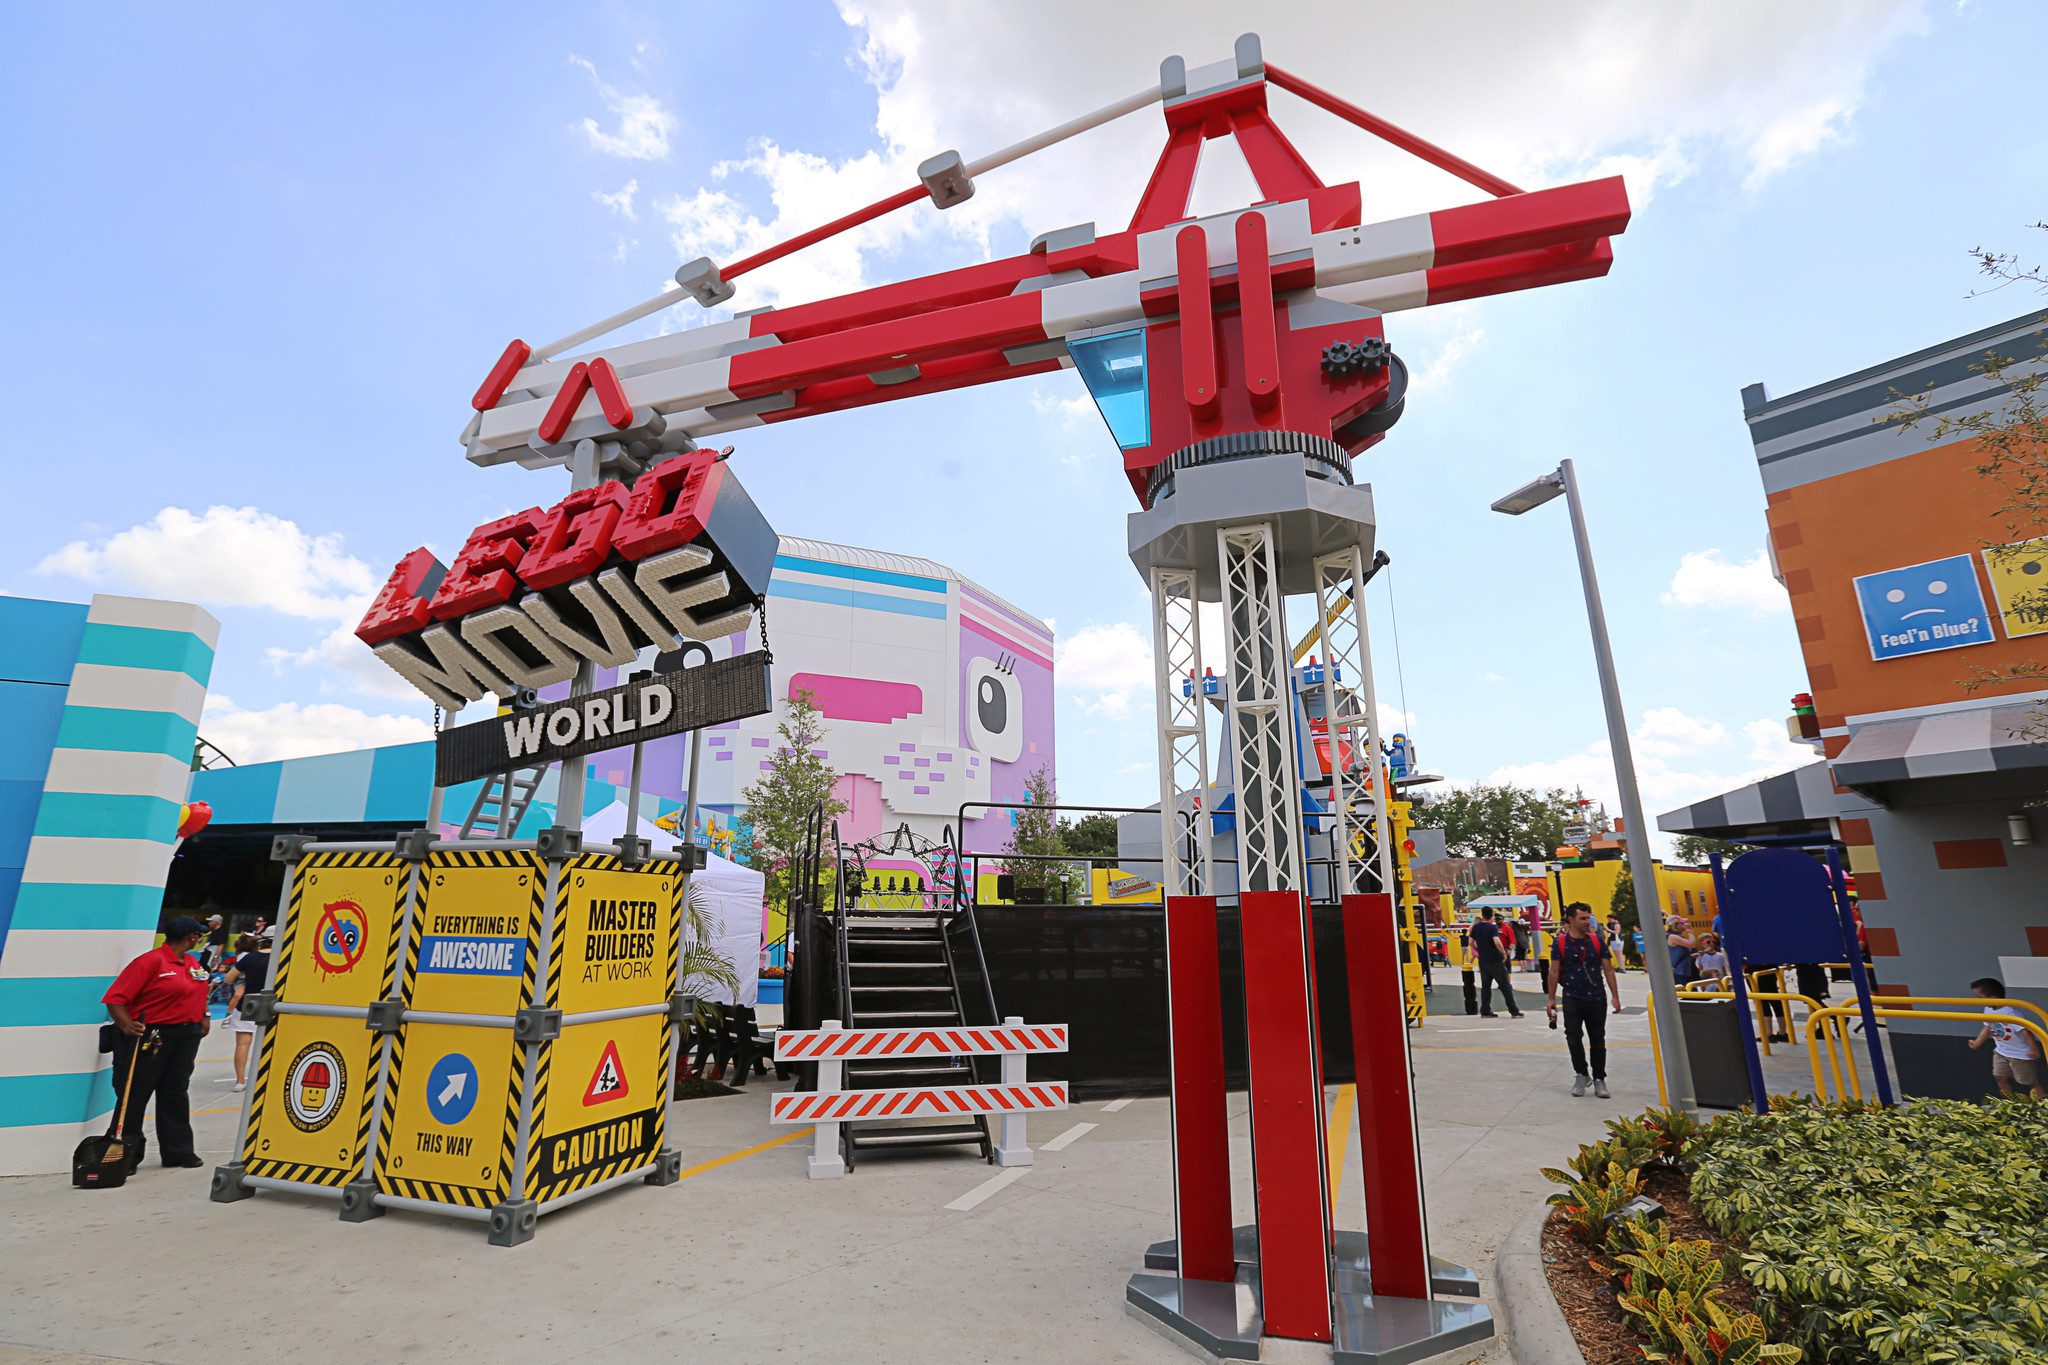 The entrance to LEGO movie world park with LEGO figures around